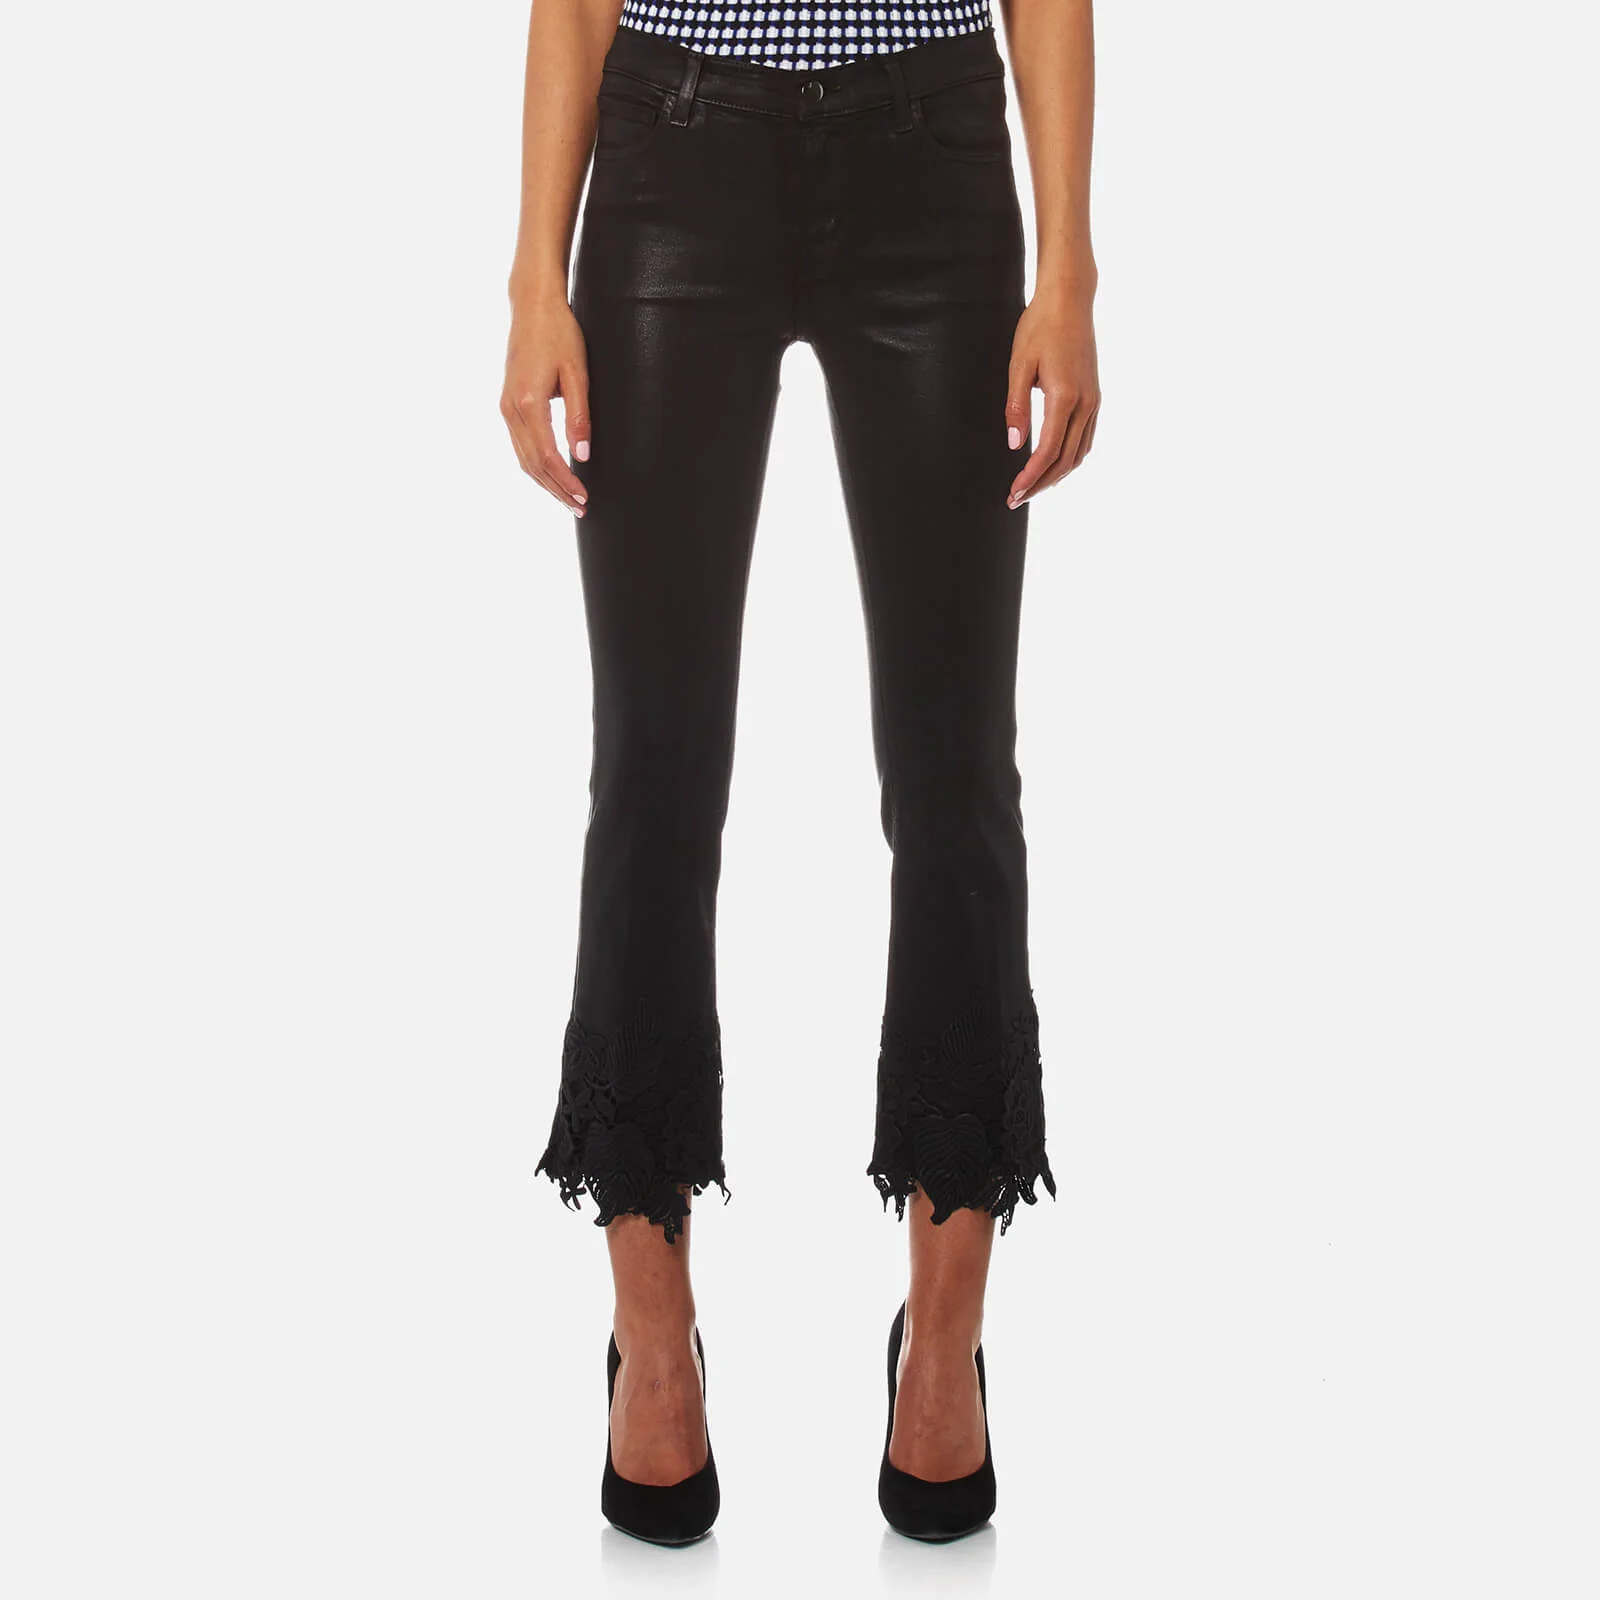 J Brand Women's Selena Mid Rise Crop Bootcut Jeans with Lace - Coated Black Lace Image 1